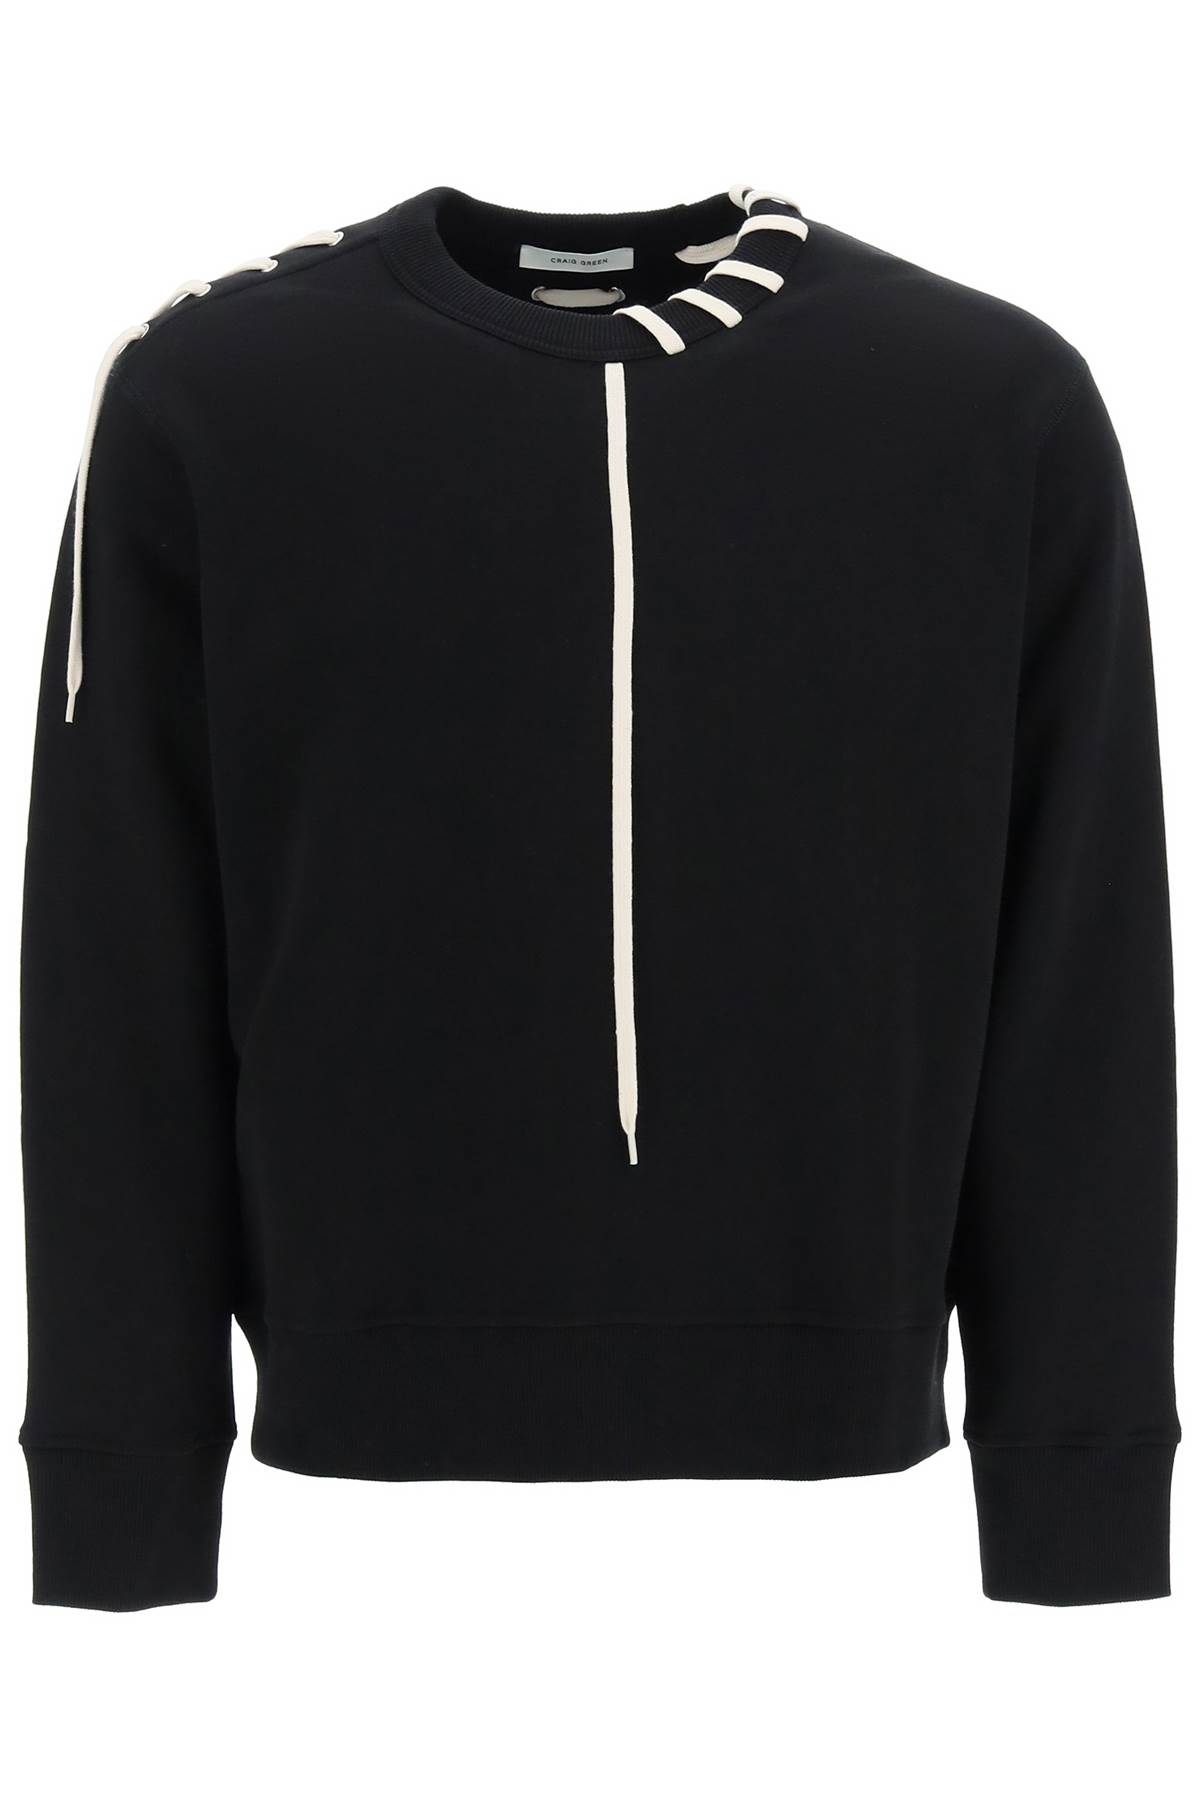 Craig Green Sweatshirt With Laces